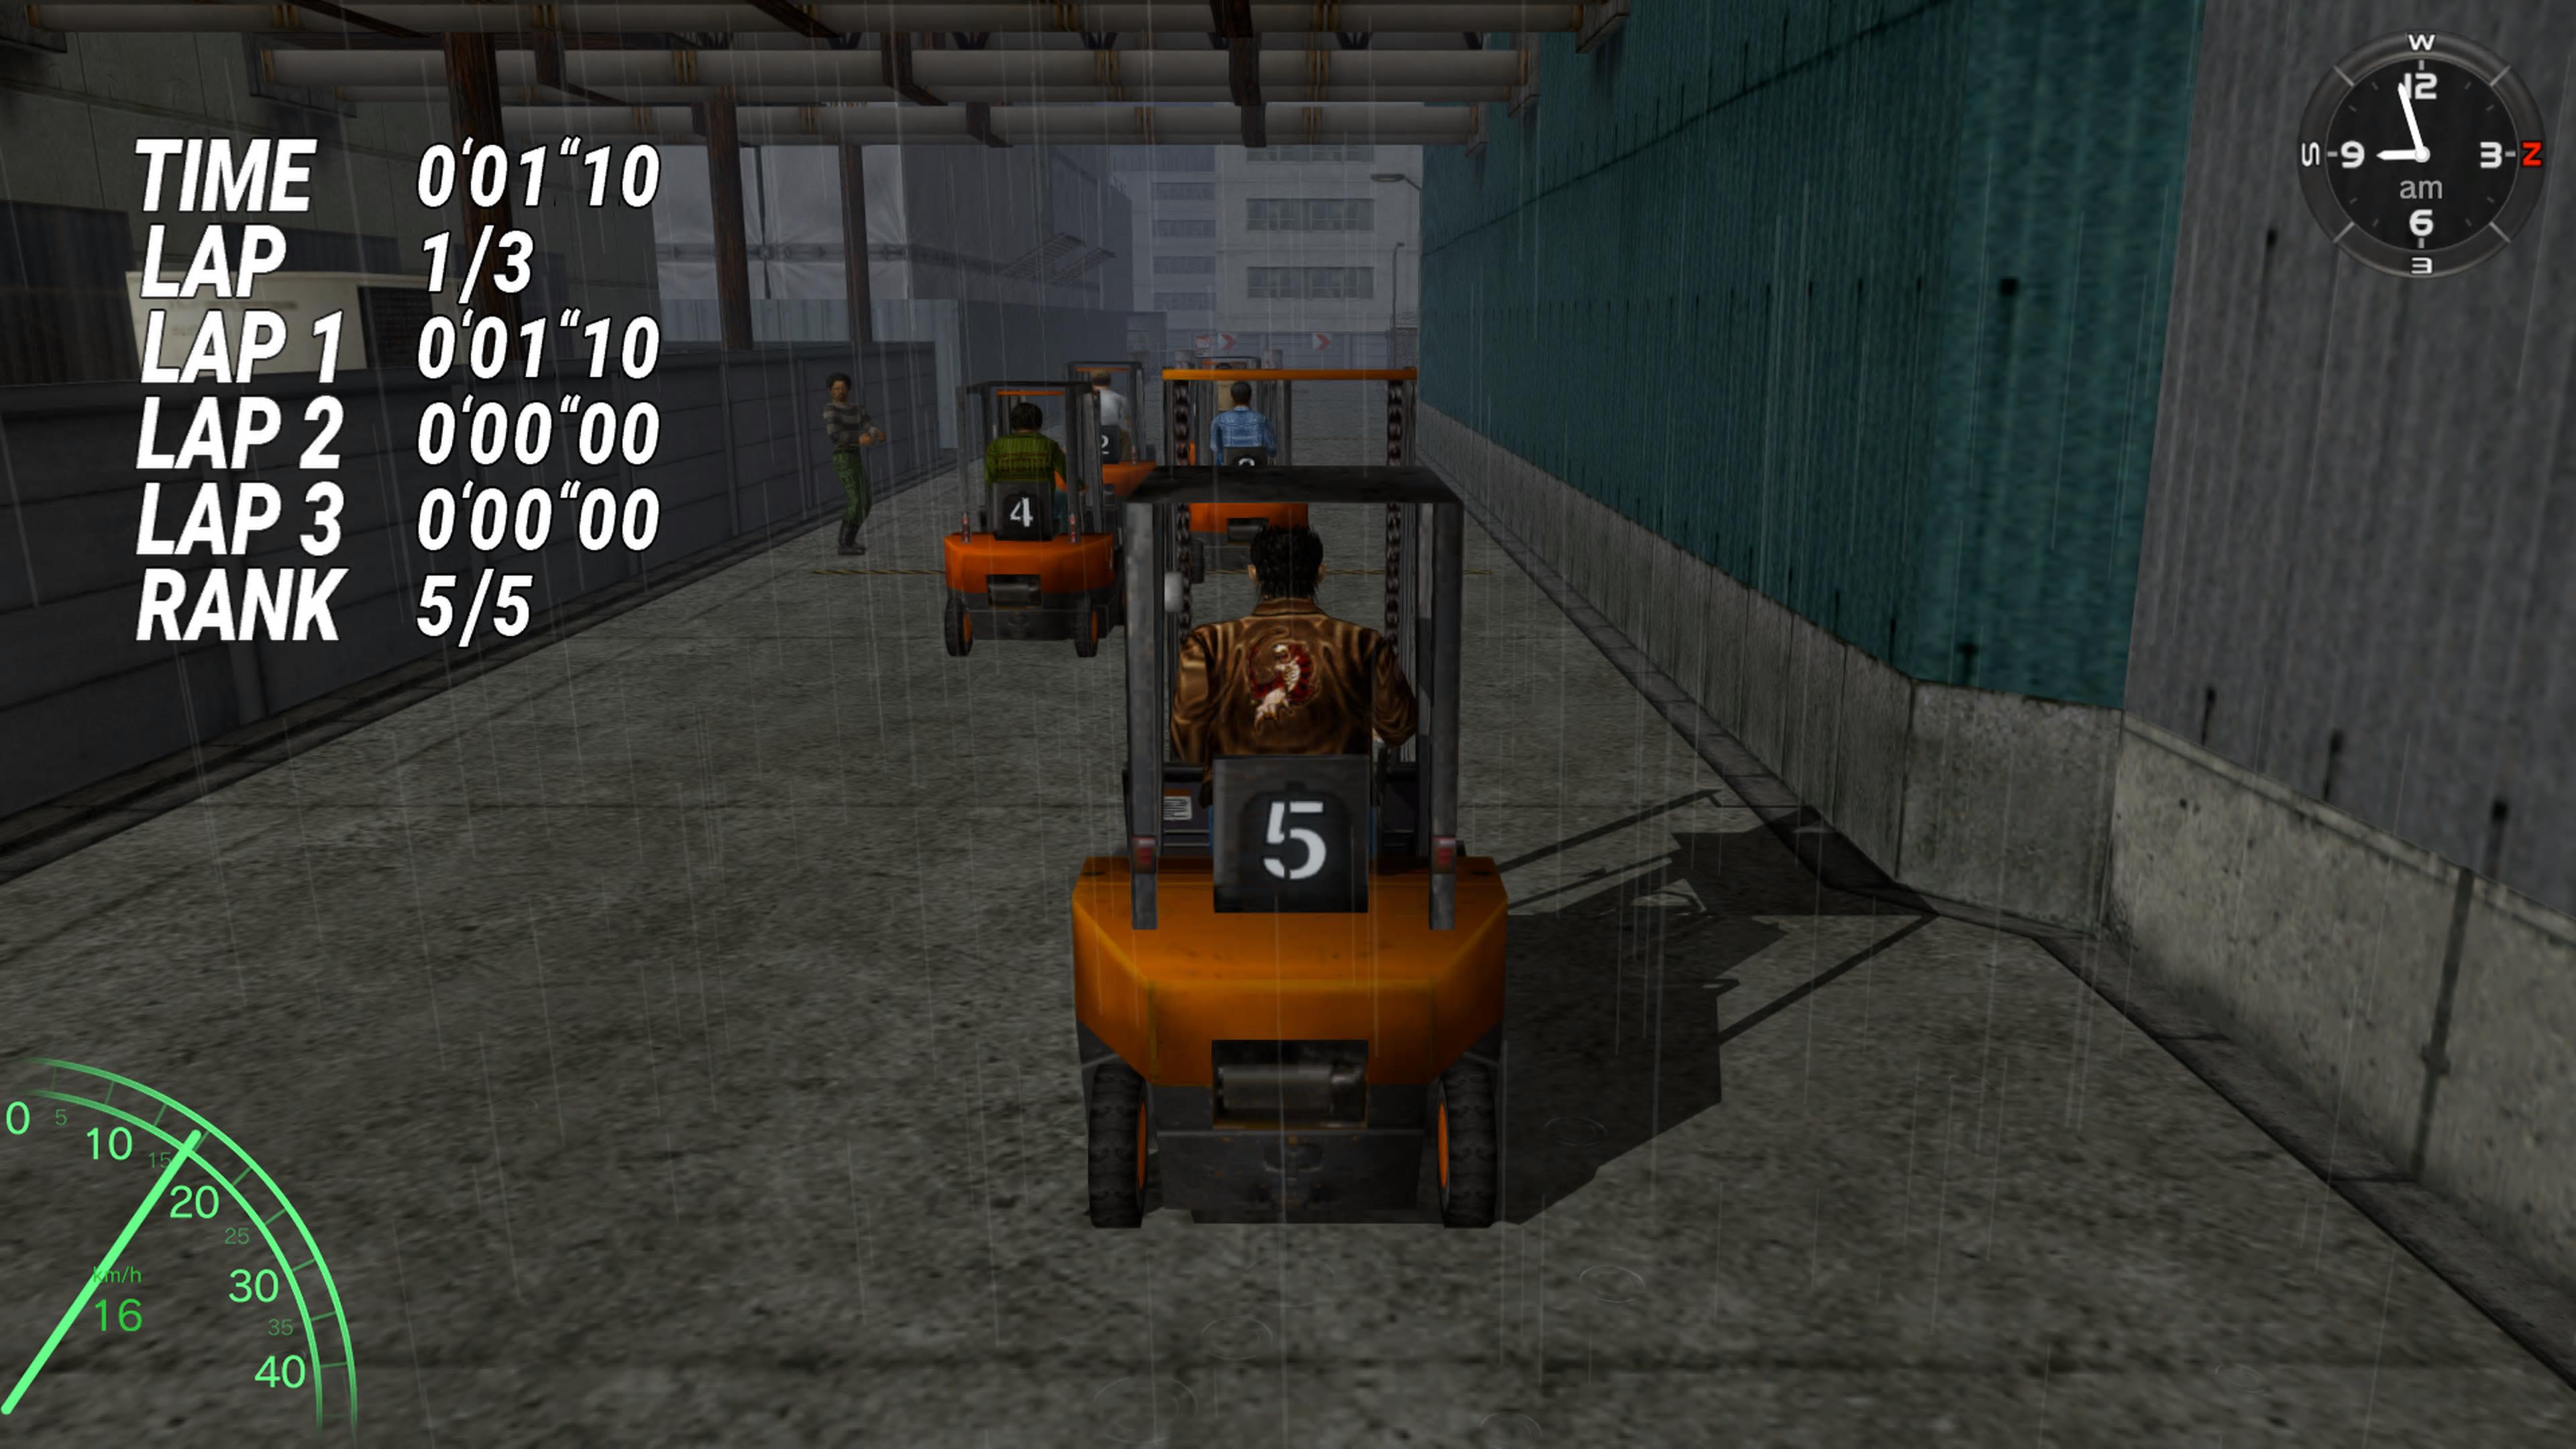 Ryo in a forklift truck race with his co-workers